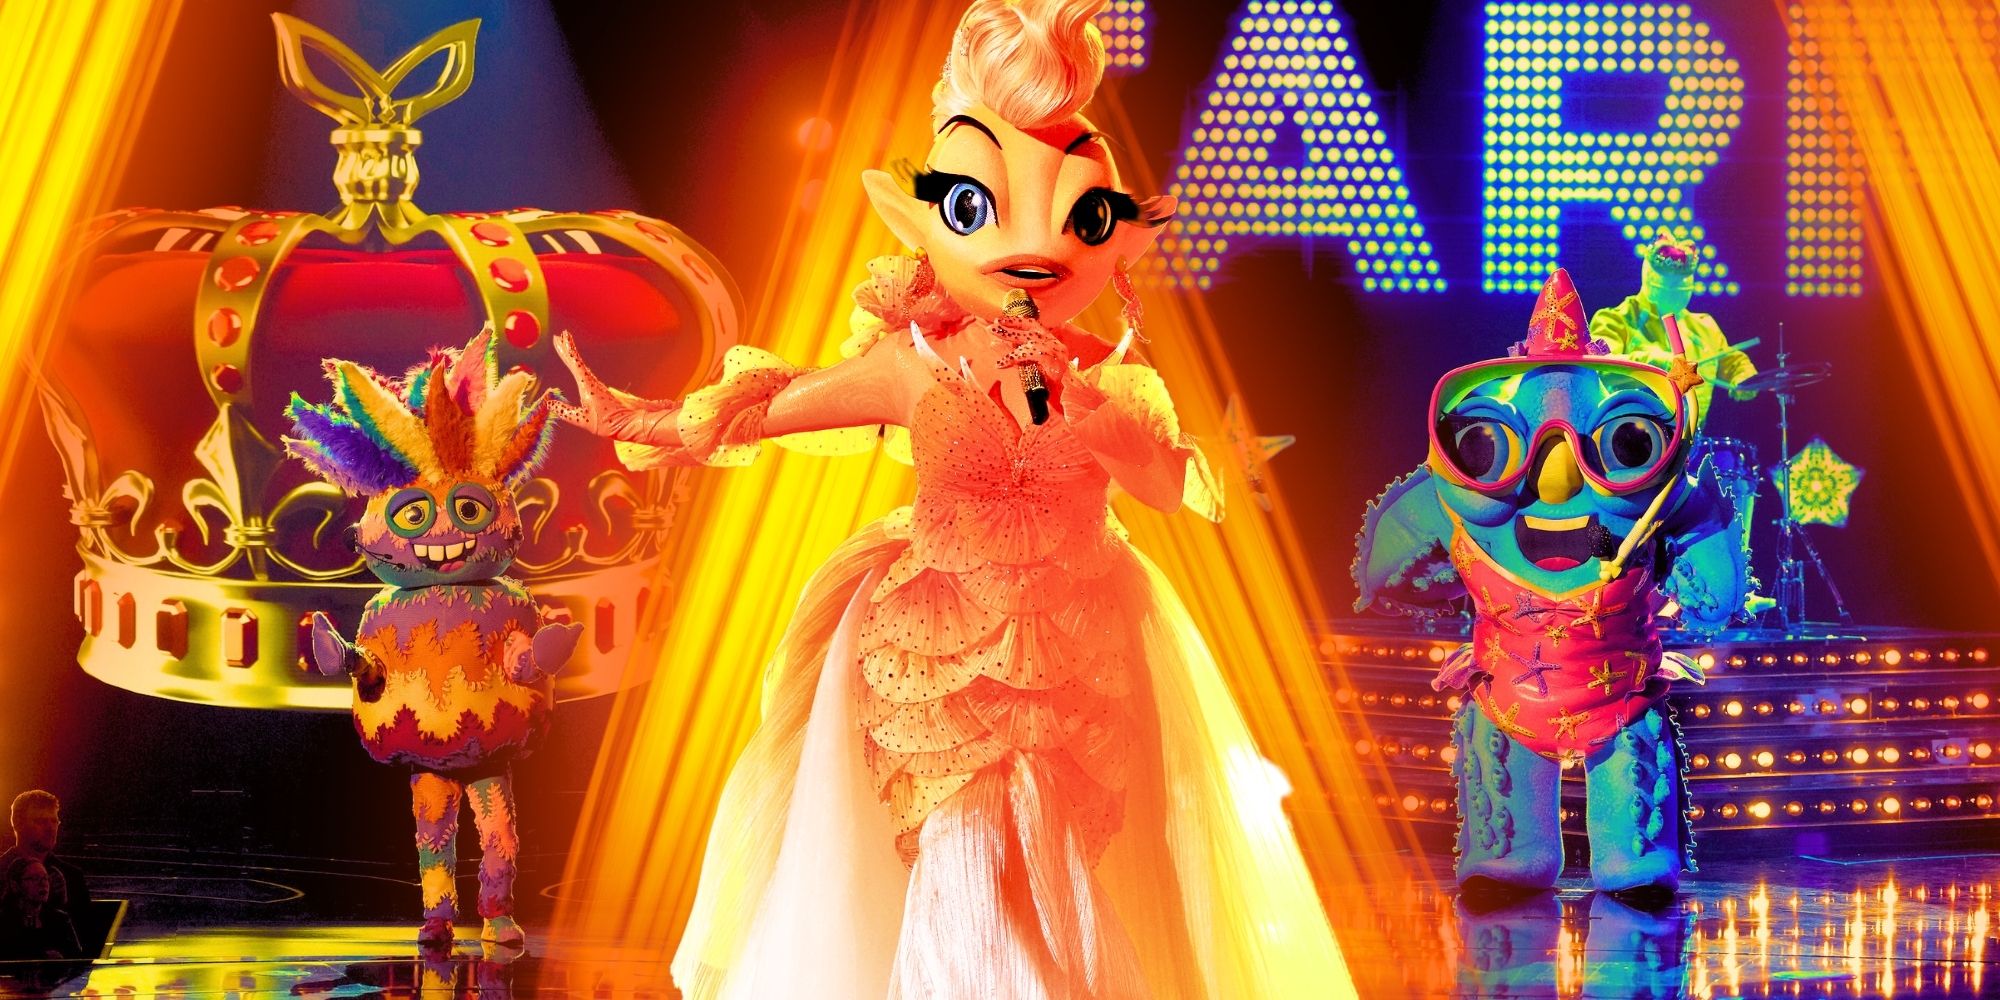 The Masked Singer's Goldfish and Starfish perform on stage.